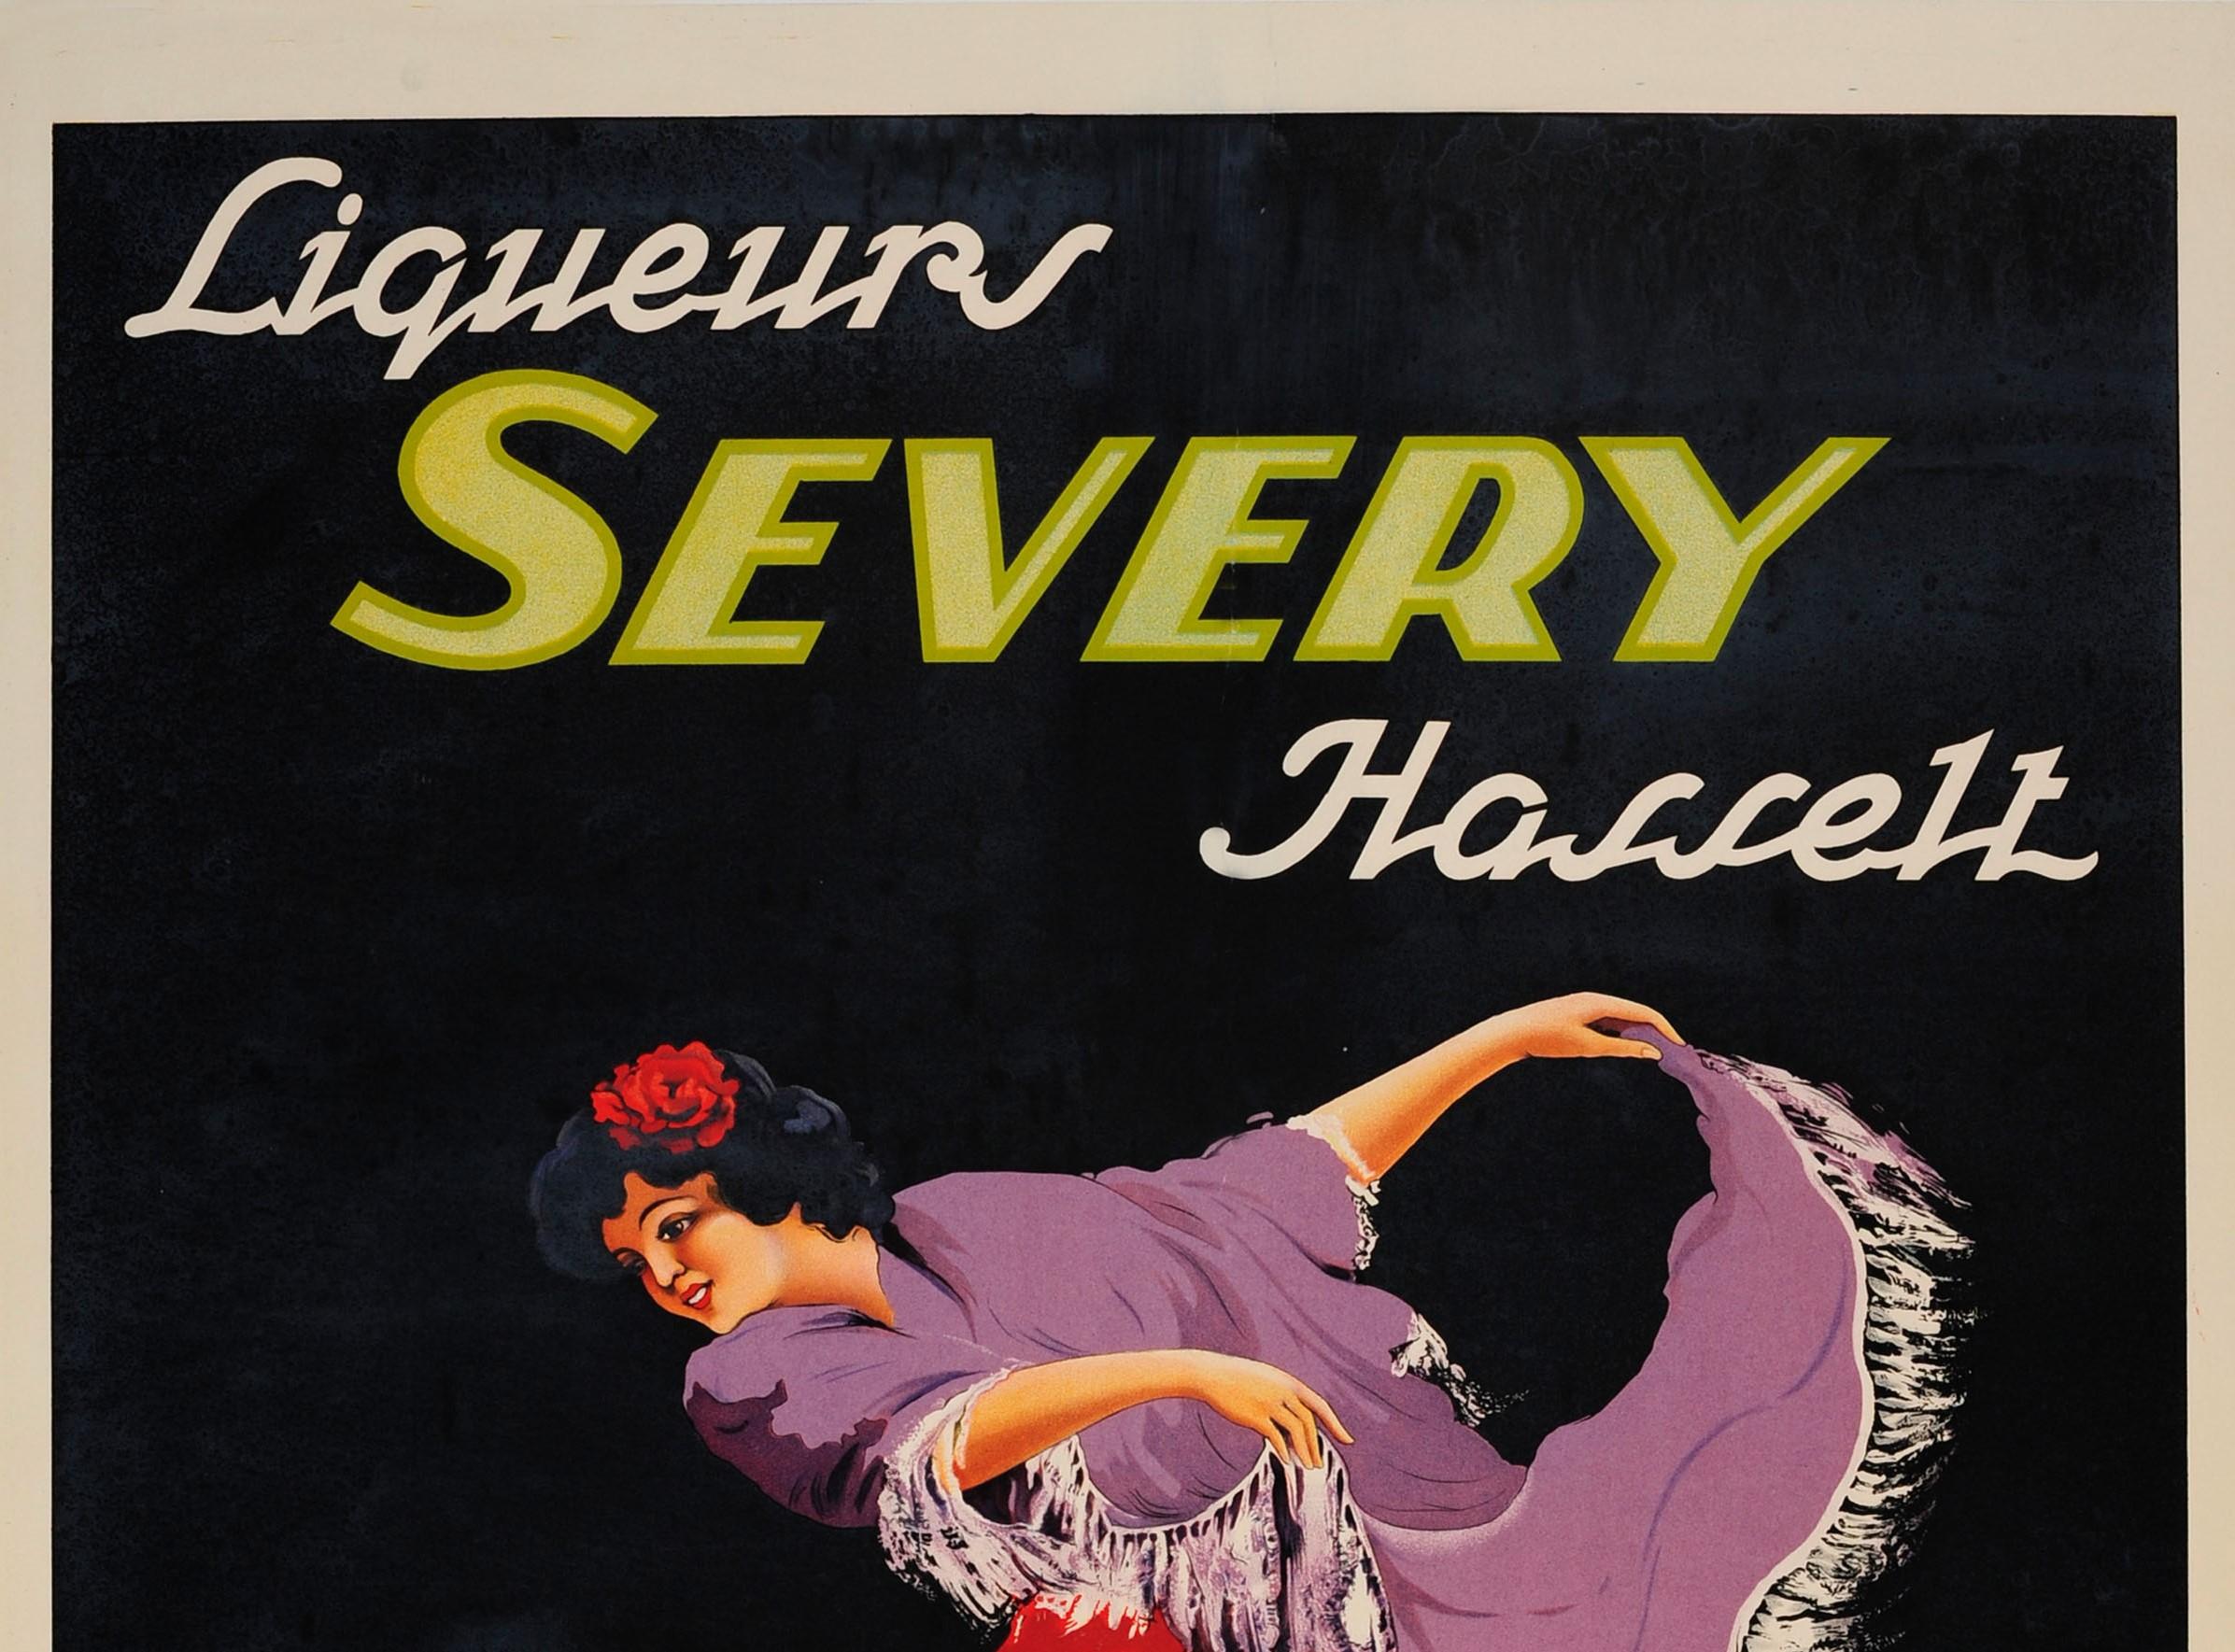 Original vintage drink advertising poster for Liqueurs Severy Hasselt featuring great artwork by Roger Berckmans (b. 1900) of a lady dancing wearing a fringed purple shawl and colorful flowing dress with a red rose flower in her hair against the